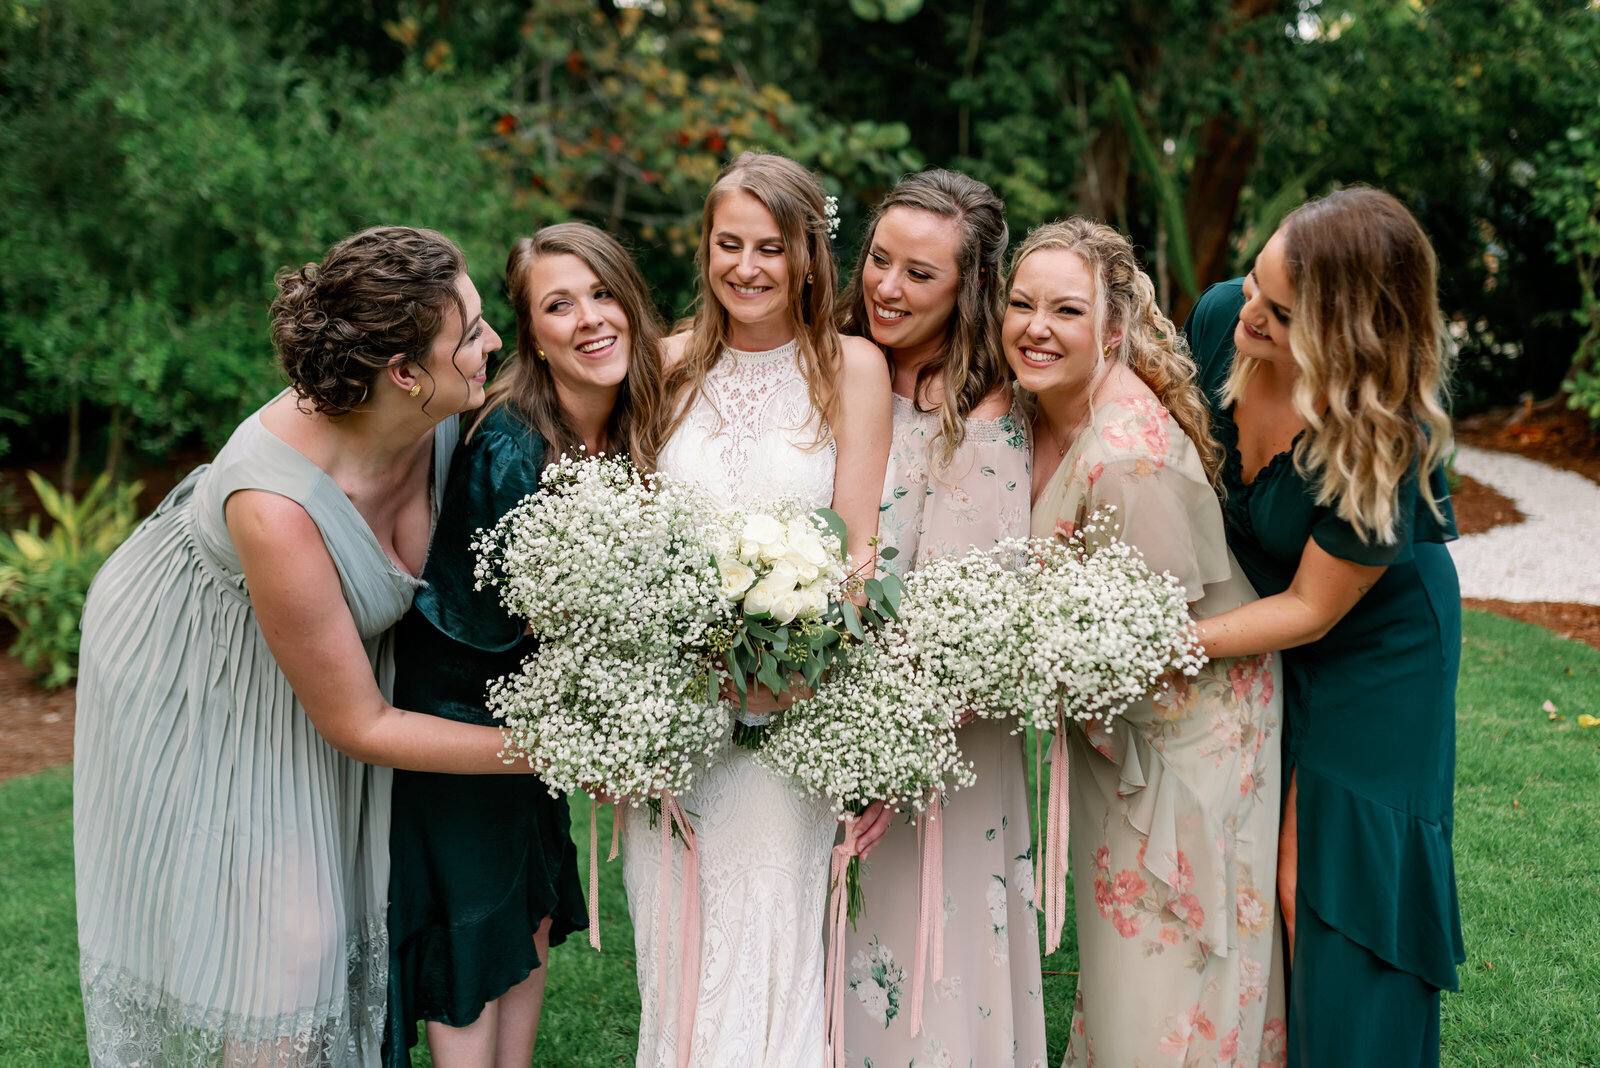 Bride and her bridesmaids hugging close together and smiling with their bouquets.